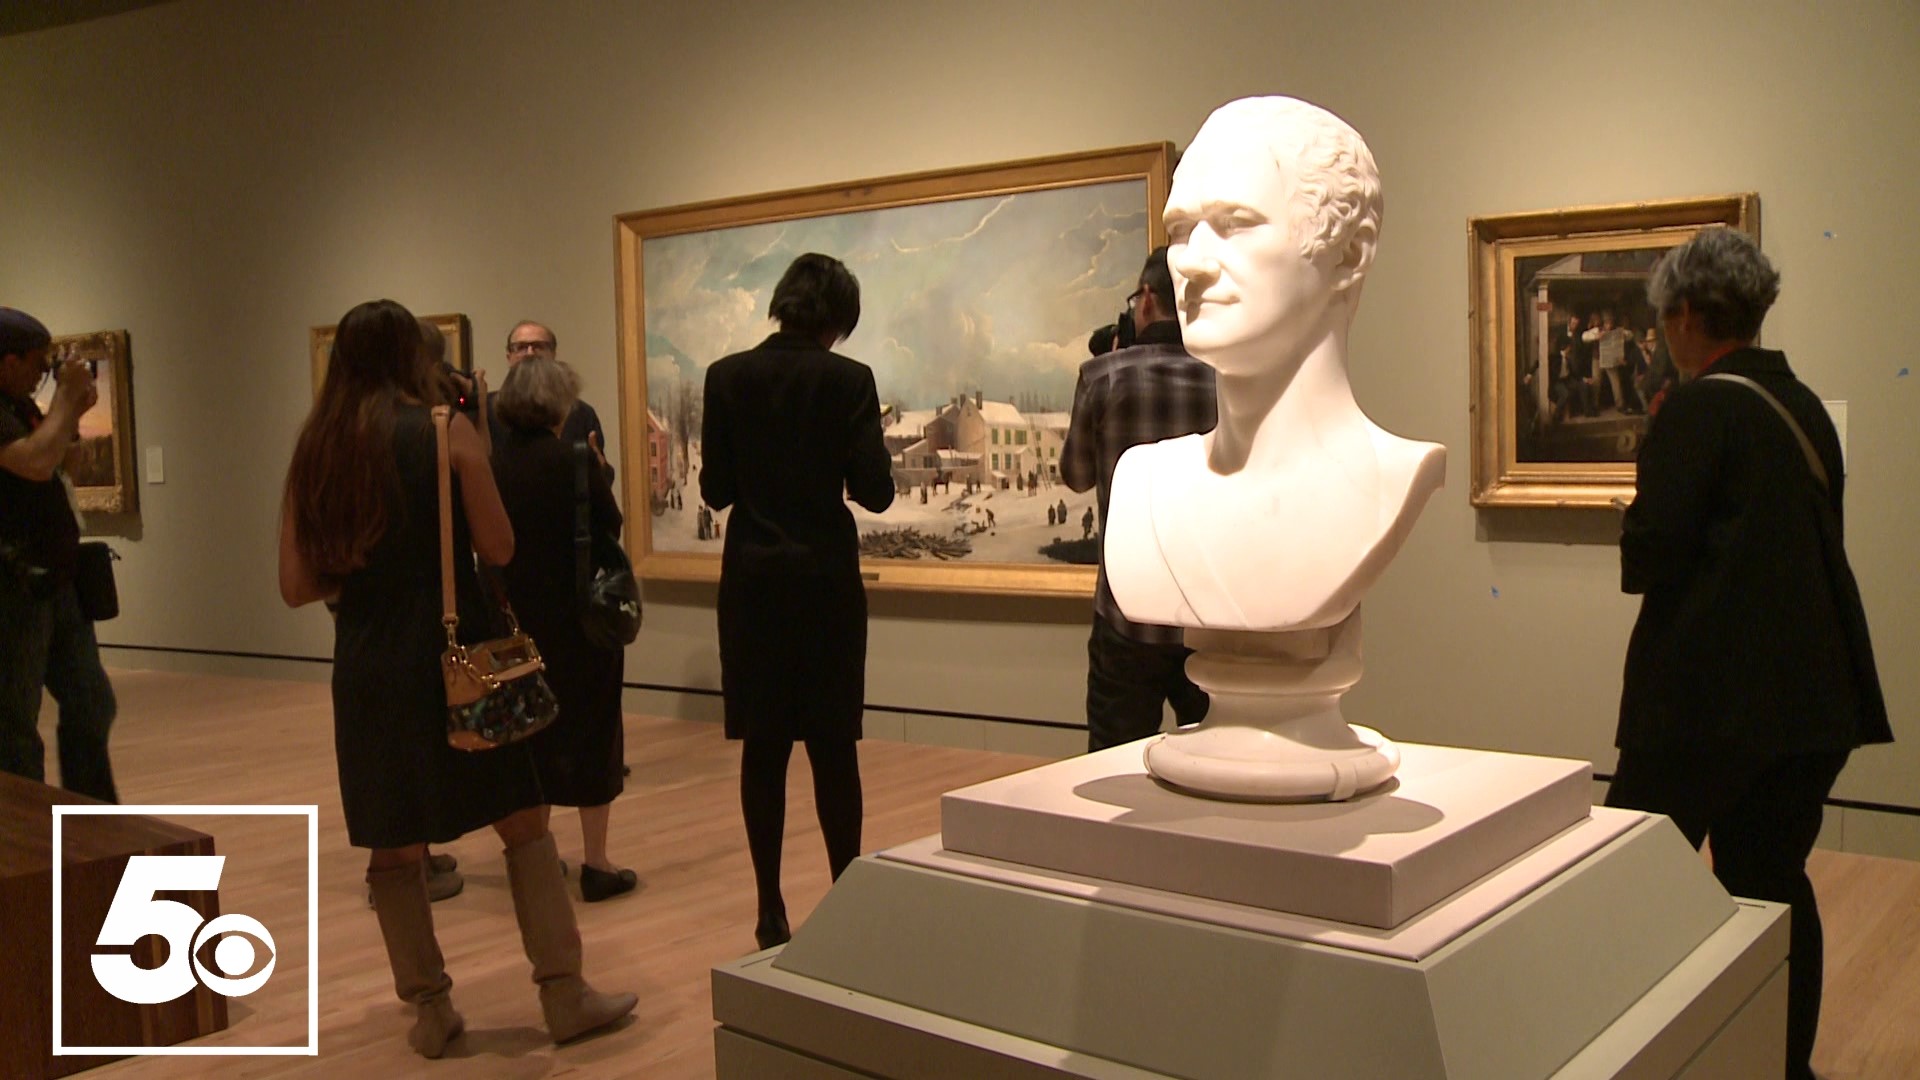 As Crystal Bridges Museum of American Art celebrates its 10th anniversary, we take a look back at the buzz in the area surrounding its grand opening in 2011.